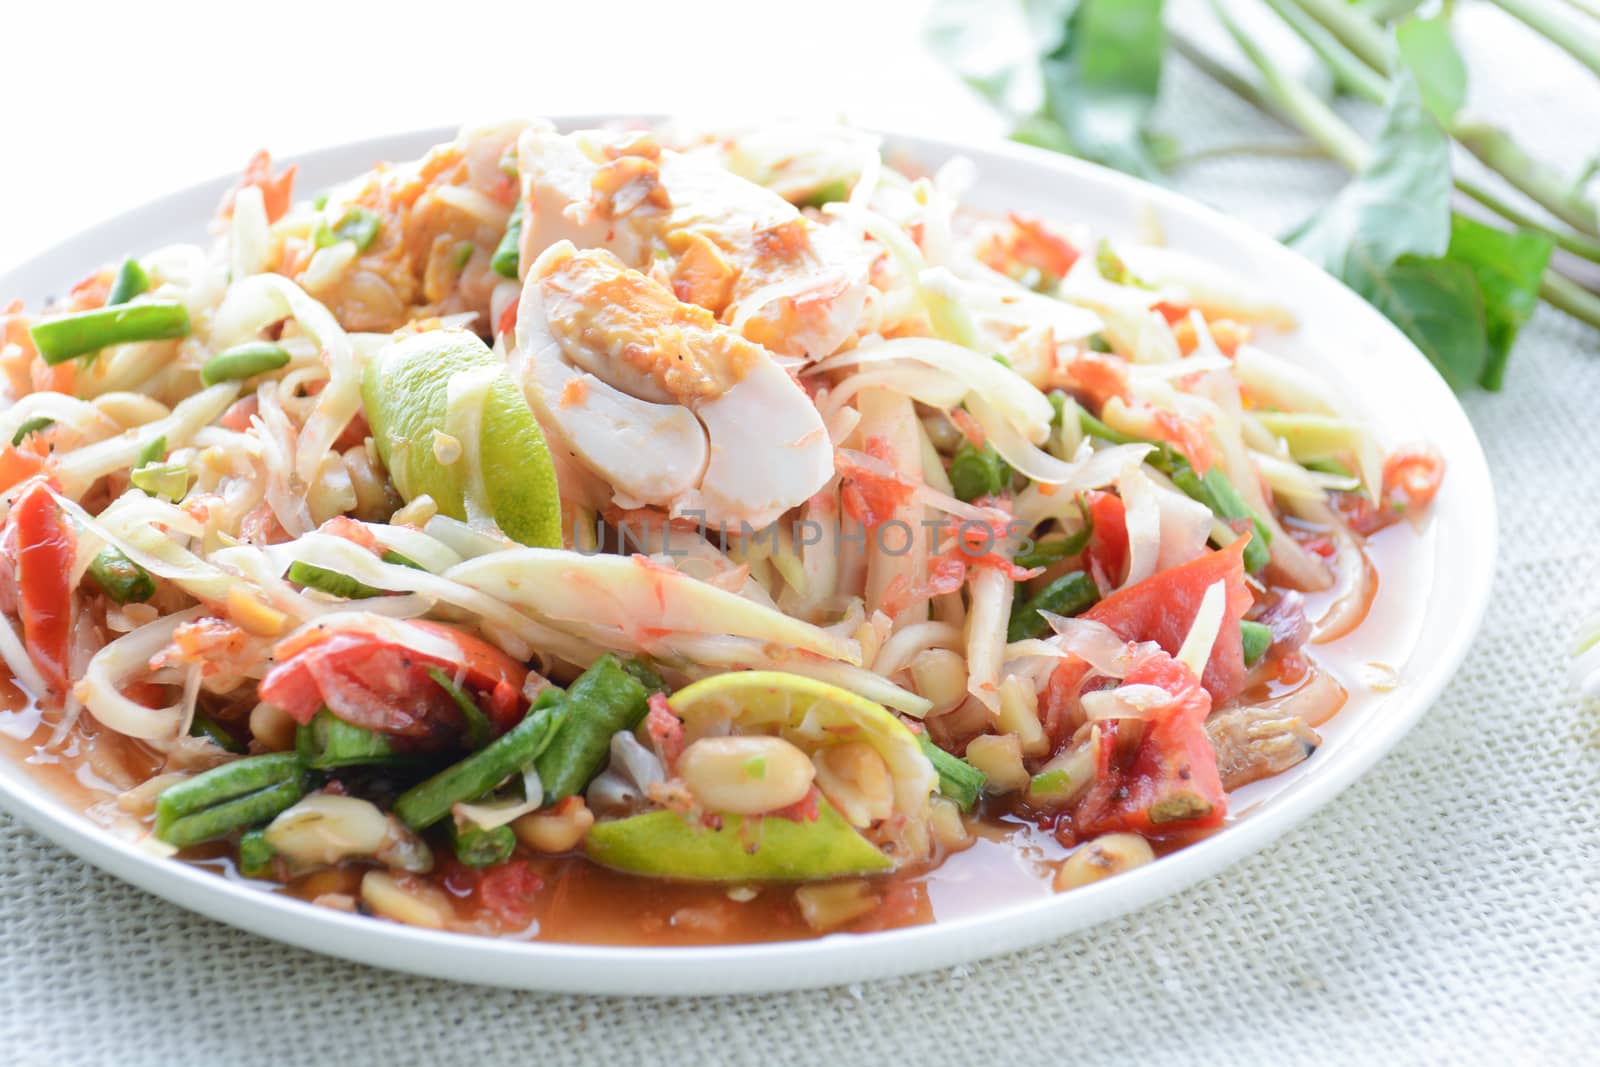 Papaya Salad with Satled Eggs, Pound chilies and garlic then pla by yuiyuize